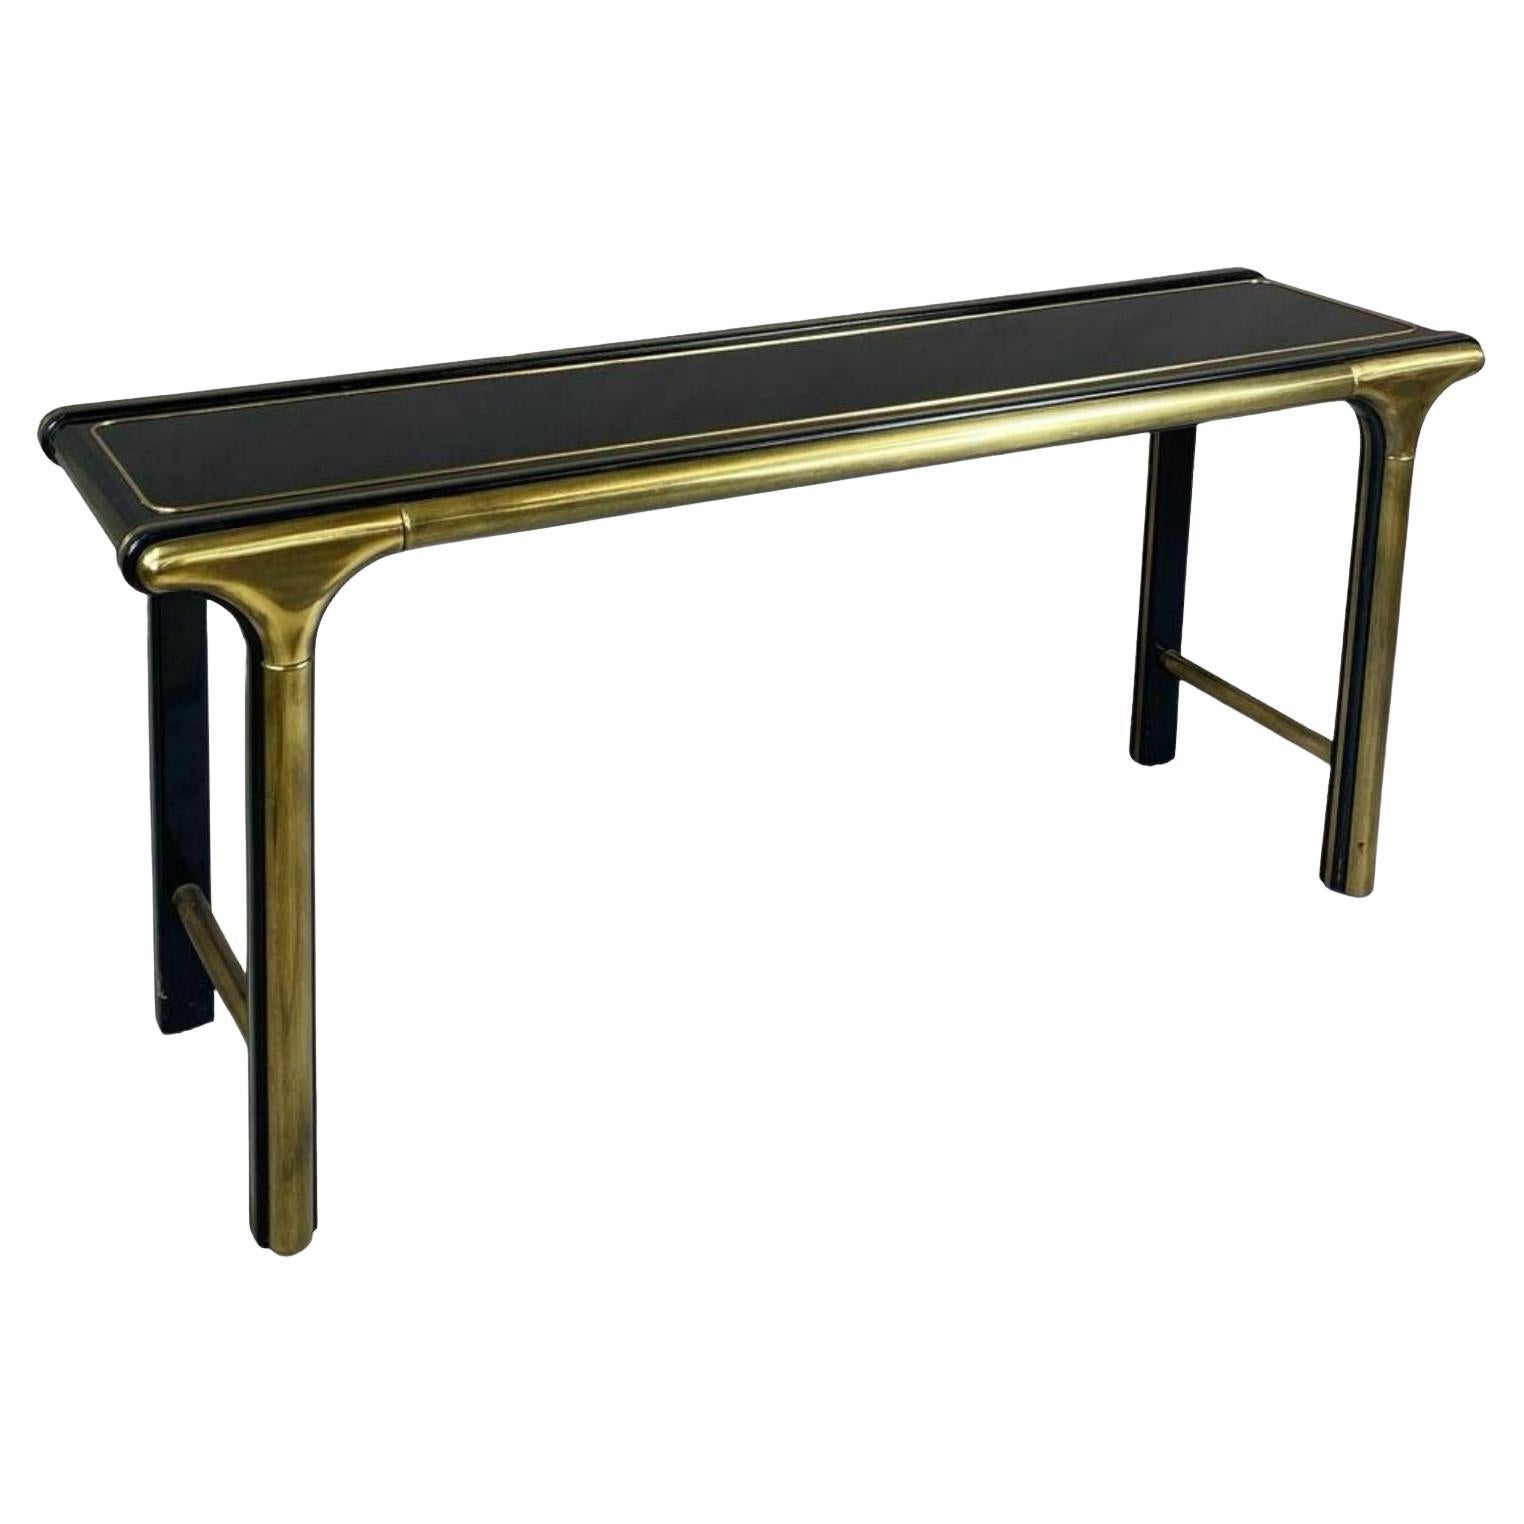 Modern Brass And Lacquer Console Table By William Doezema For Mastercraft